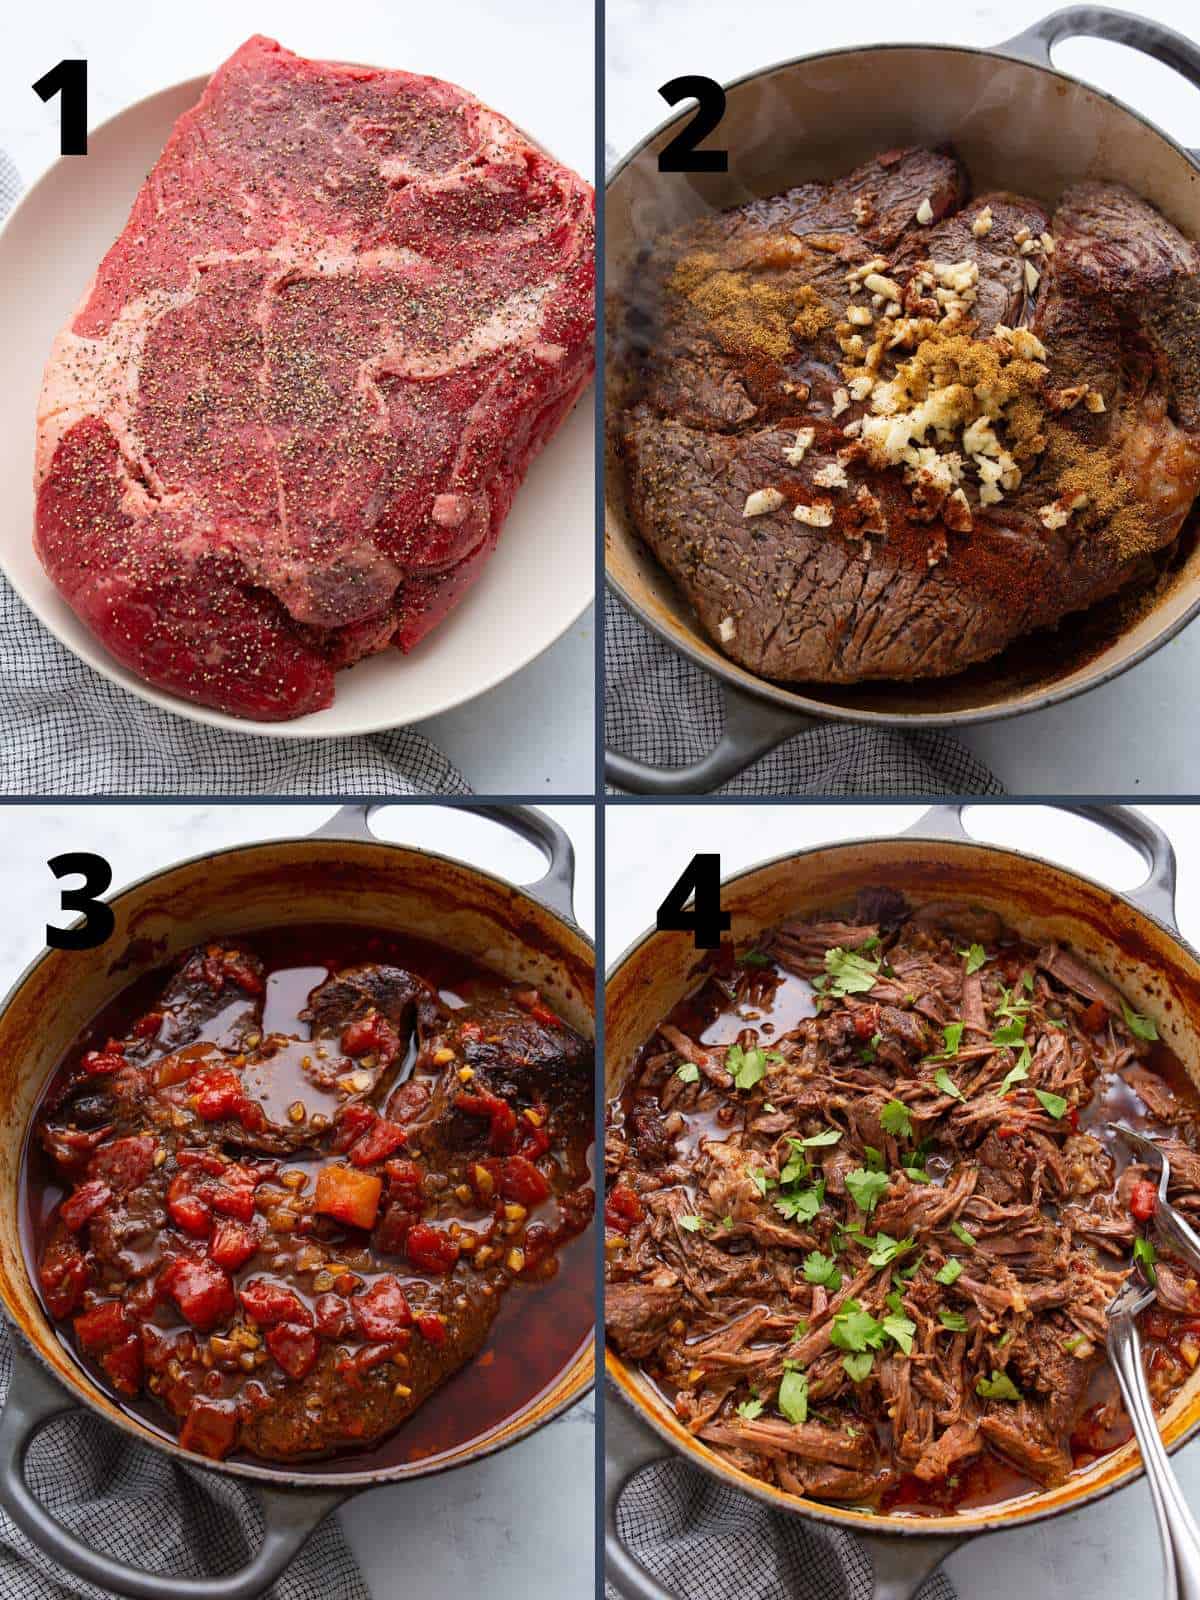 A collage of 4 images showing the steps for making Mexican Shredded Beef.